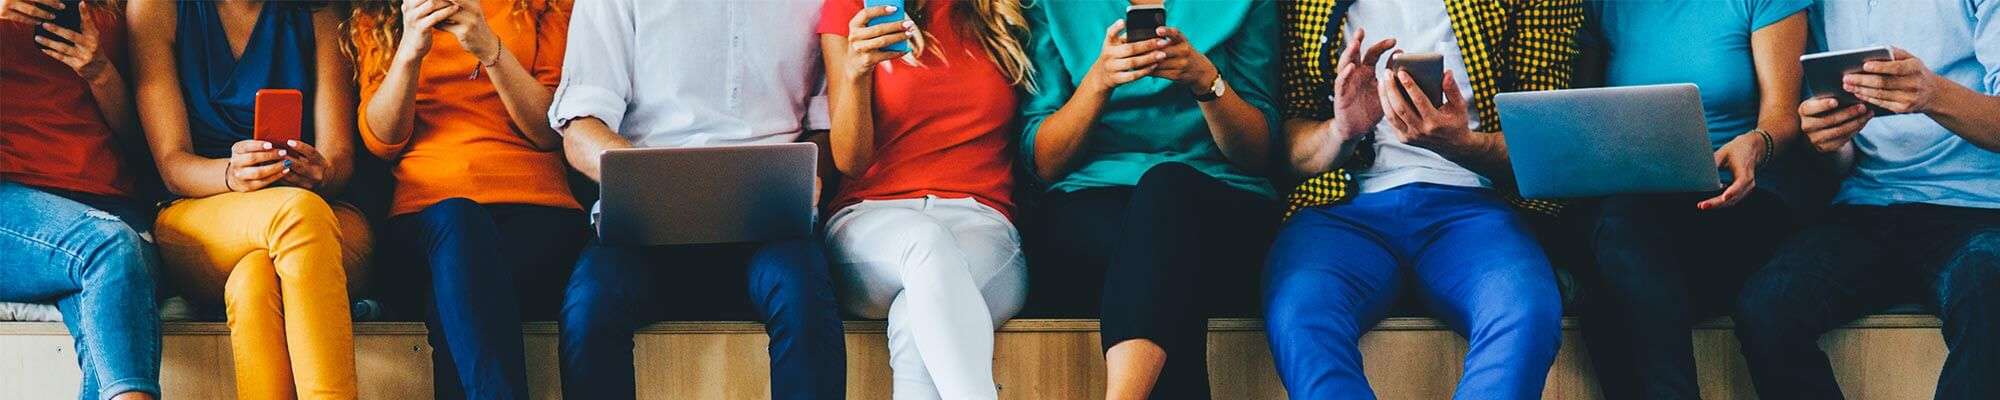 People sitting on bench with devices